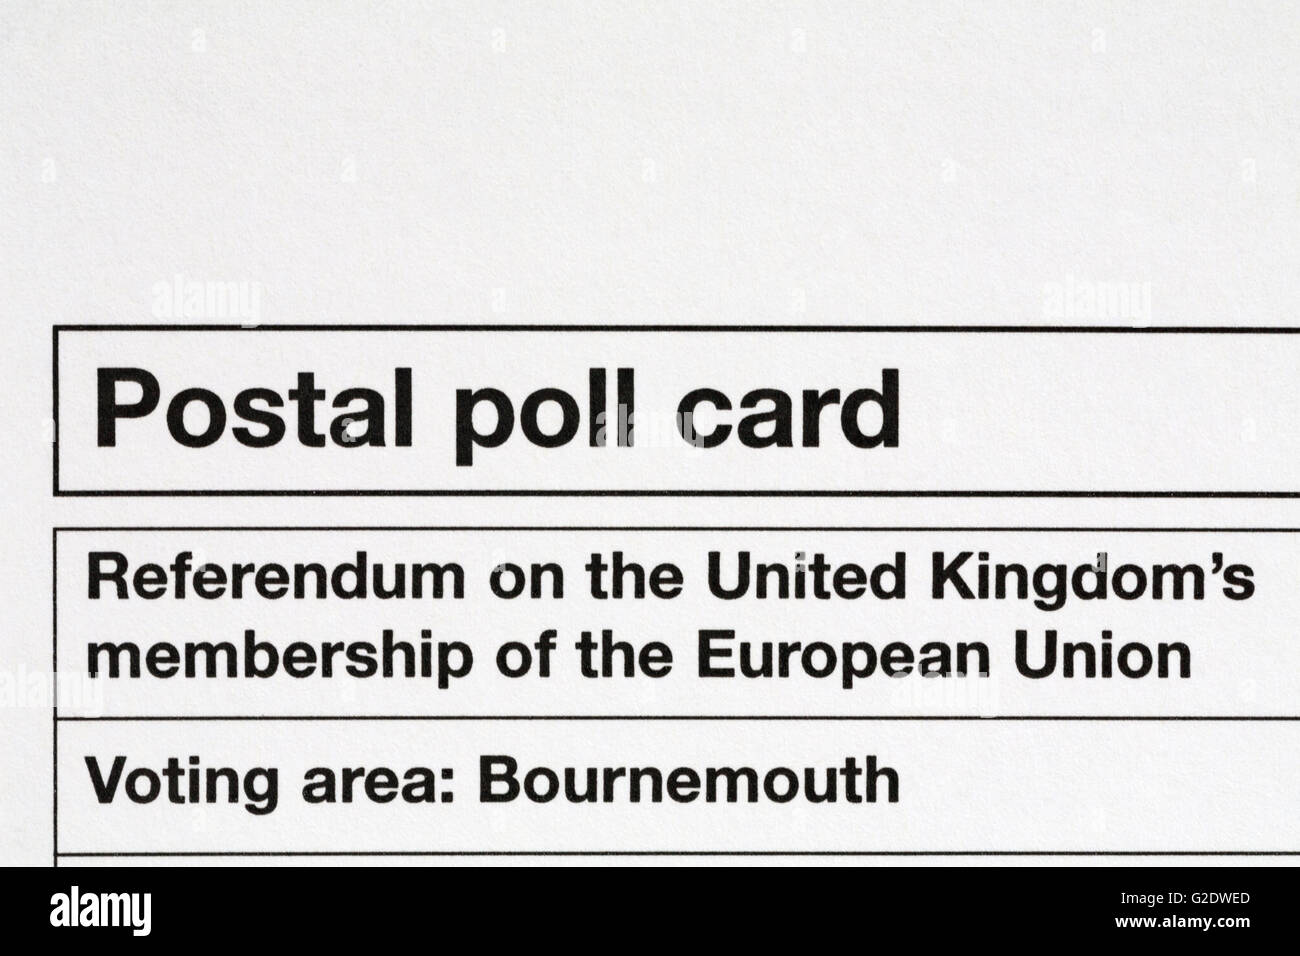 Postal poll card details of Referendum on the United Kingdom's membership of the European Union 16 voting area Bournemouth Stock Photo